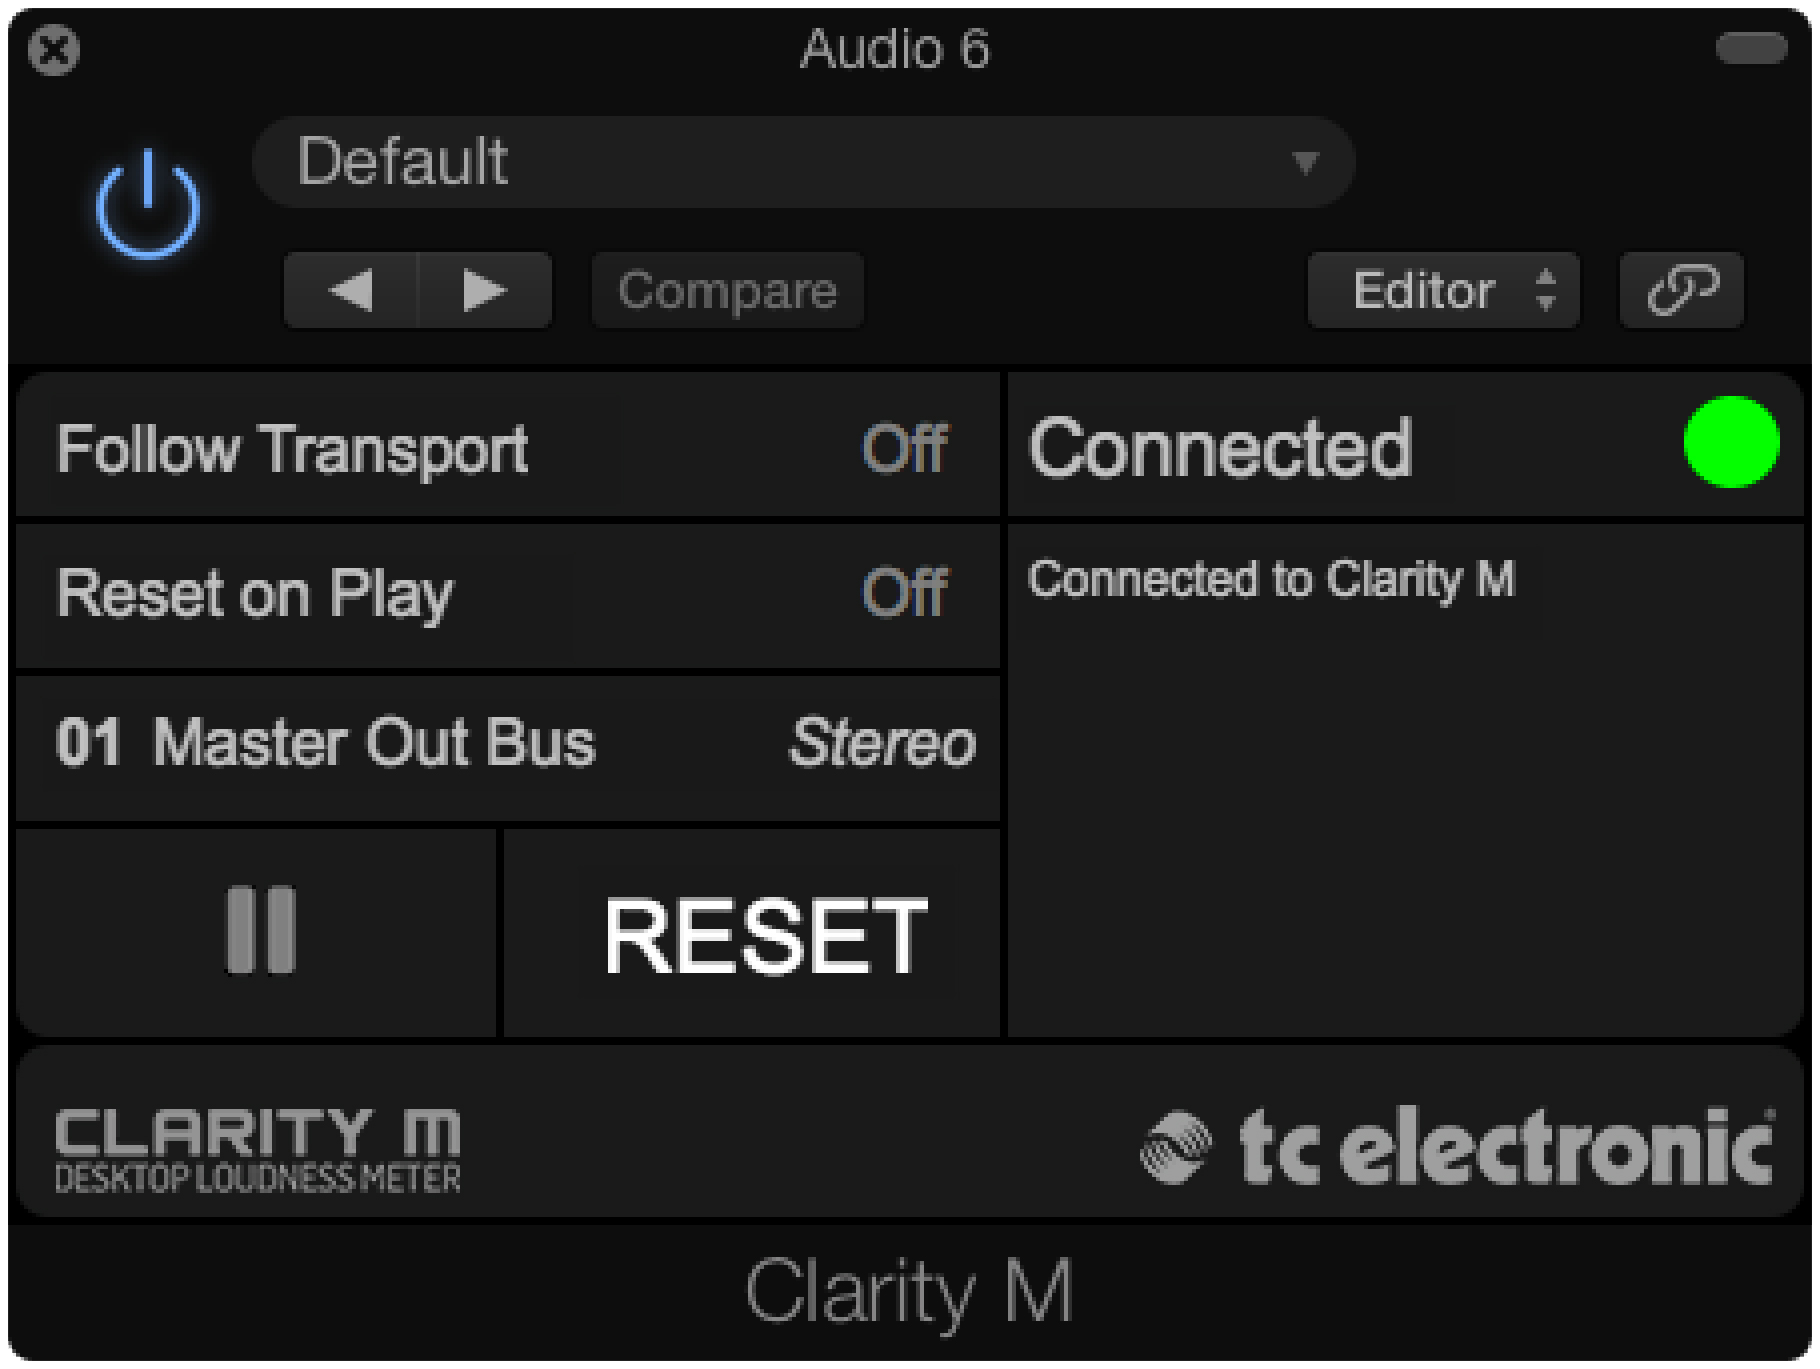 Clarity M Plug-In free metering by TC Electronic